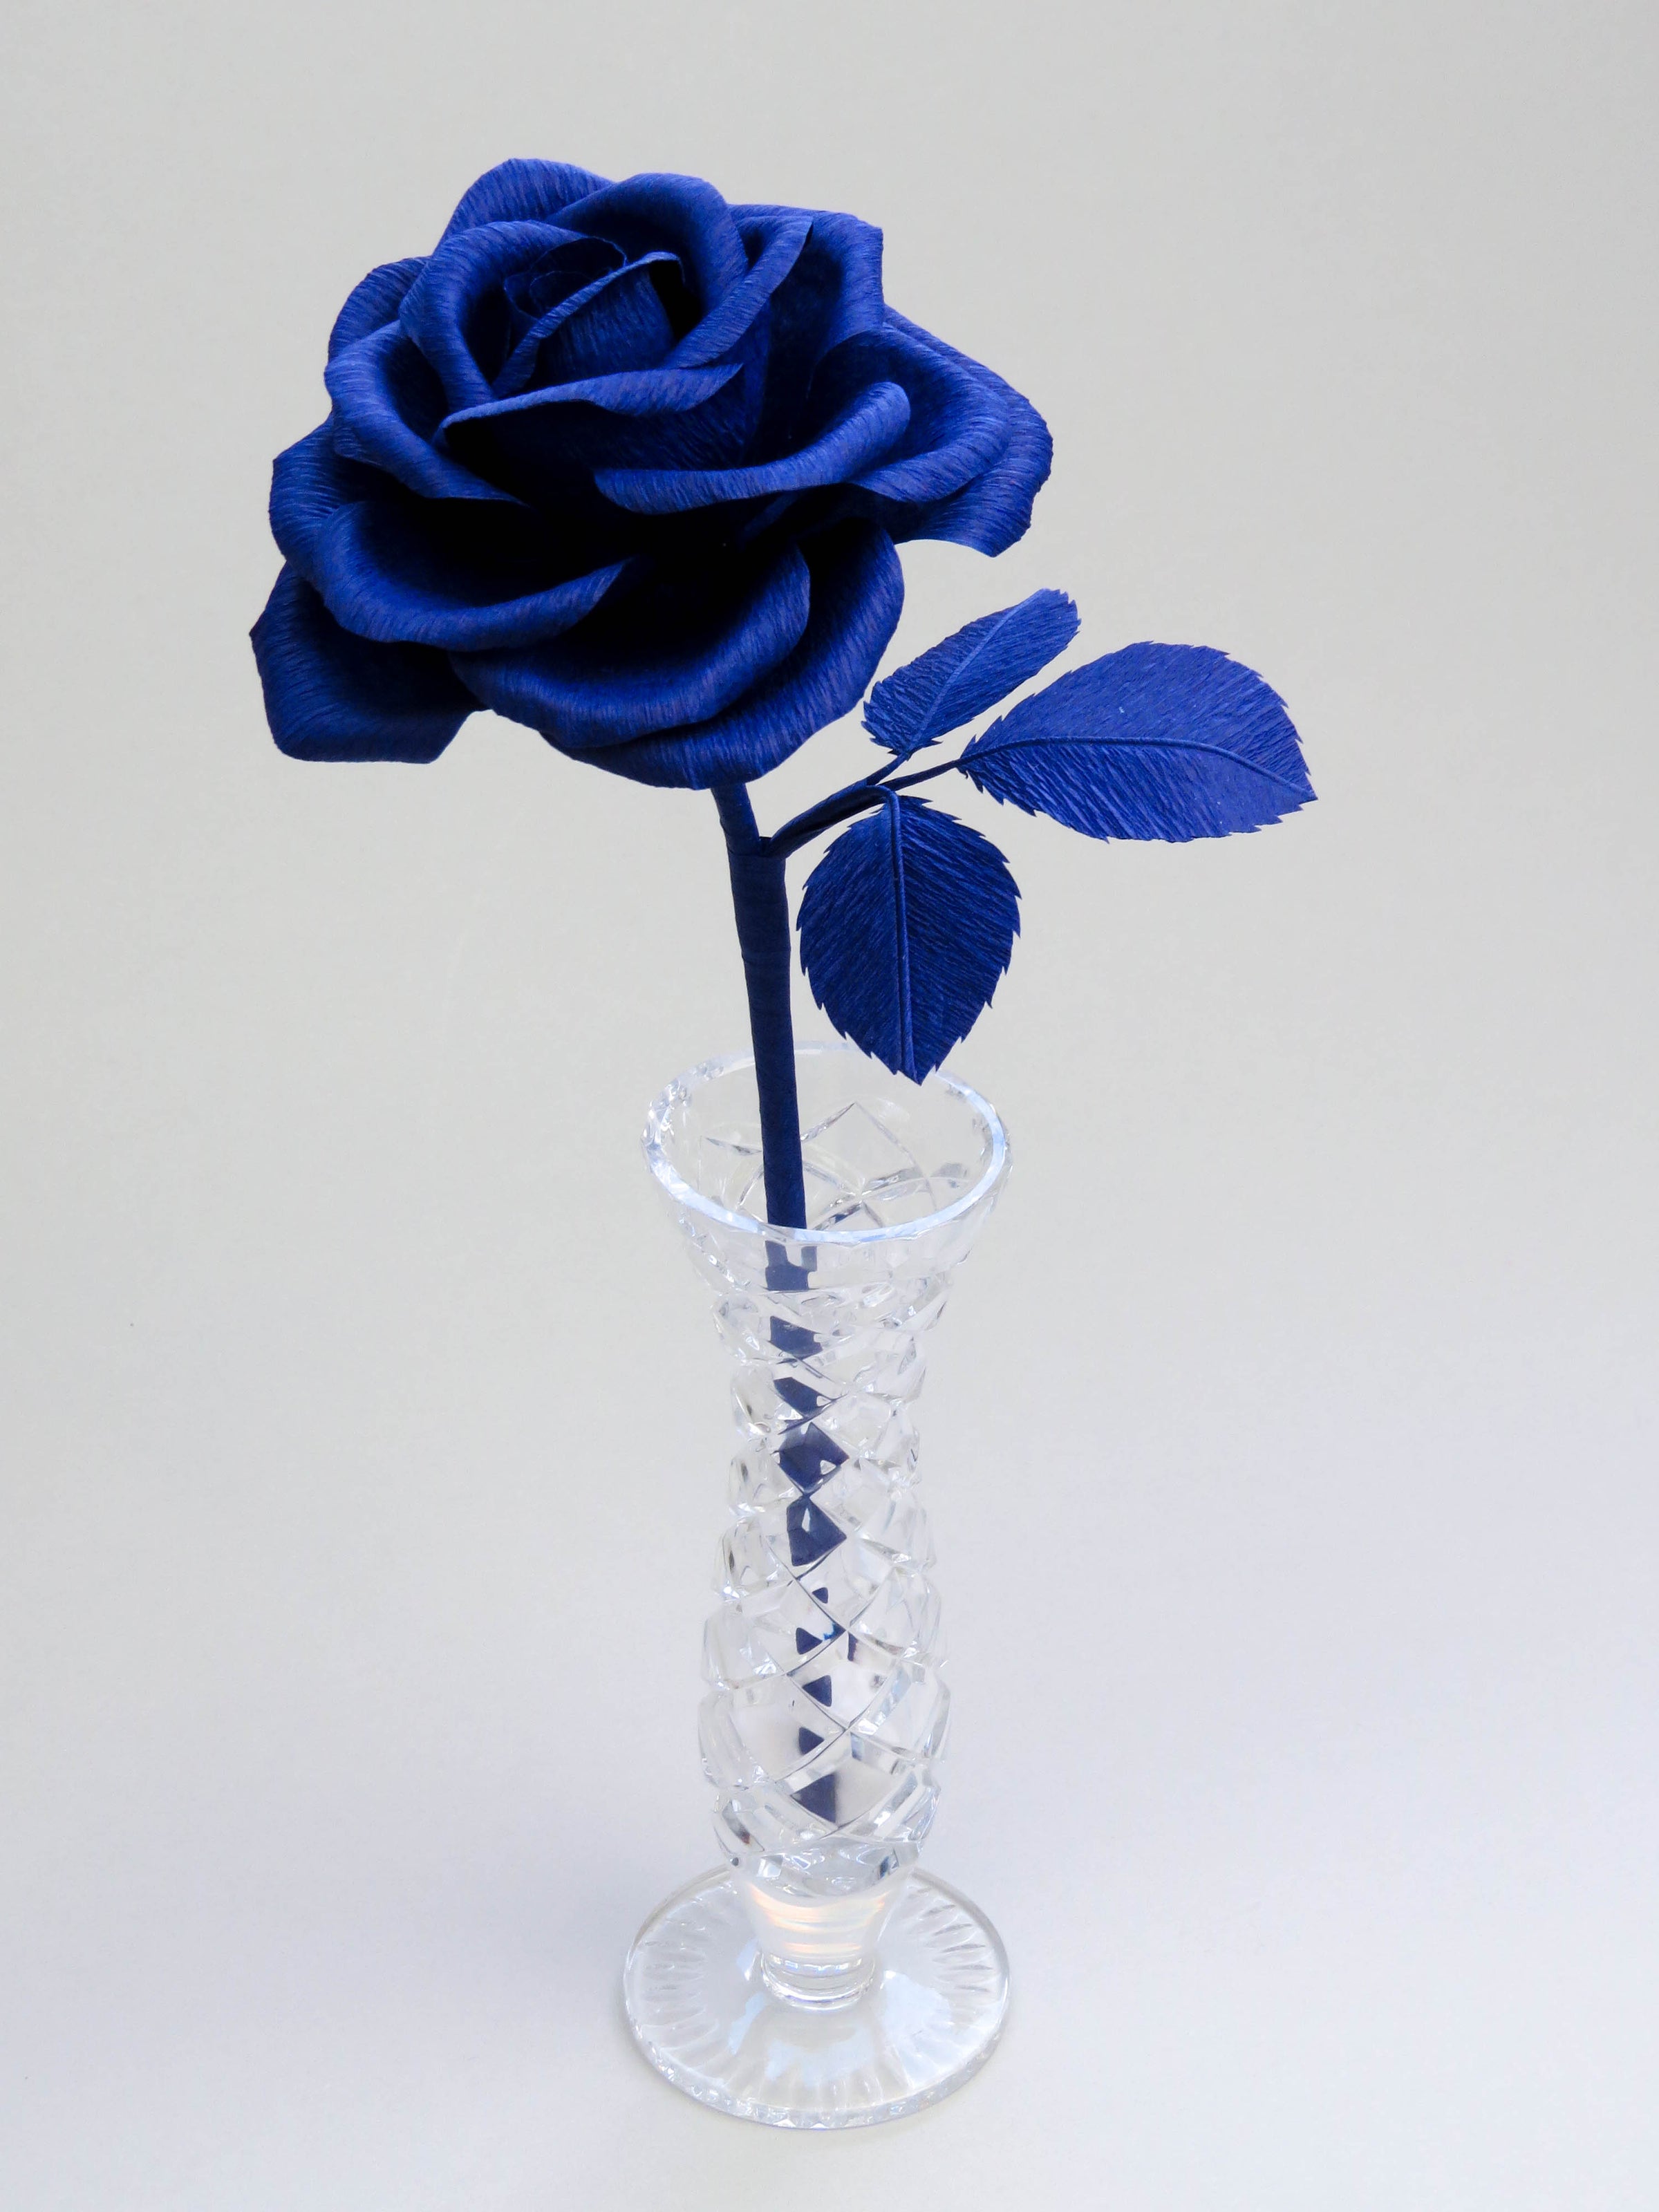 Sapphire blue crepe paper rose with three sapphire blue leaves standing in a narrow glass vase against a light grey backdrop